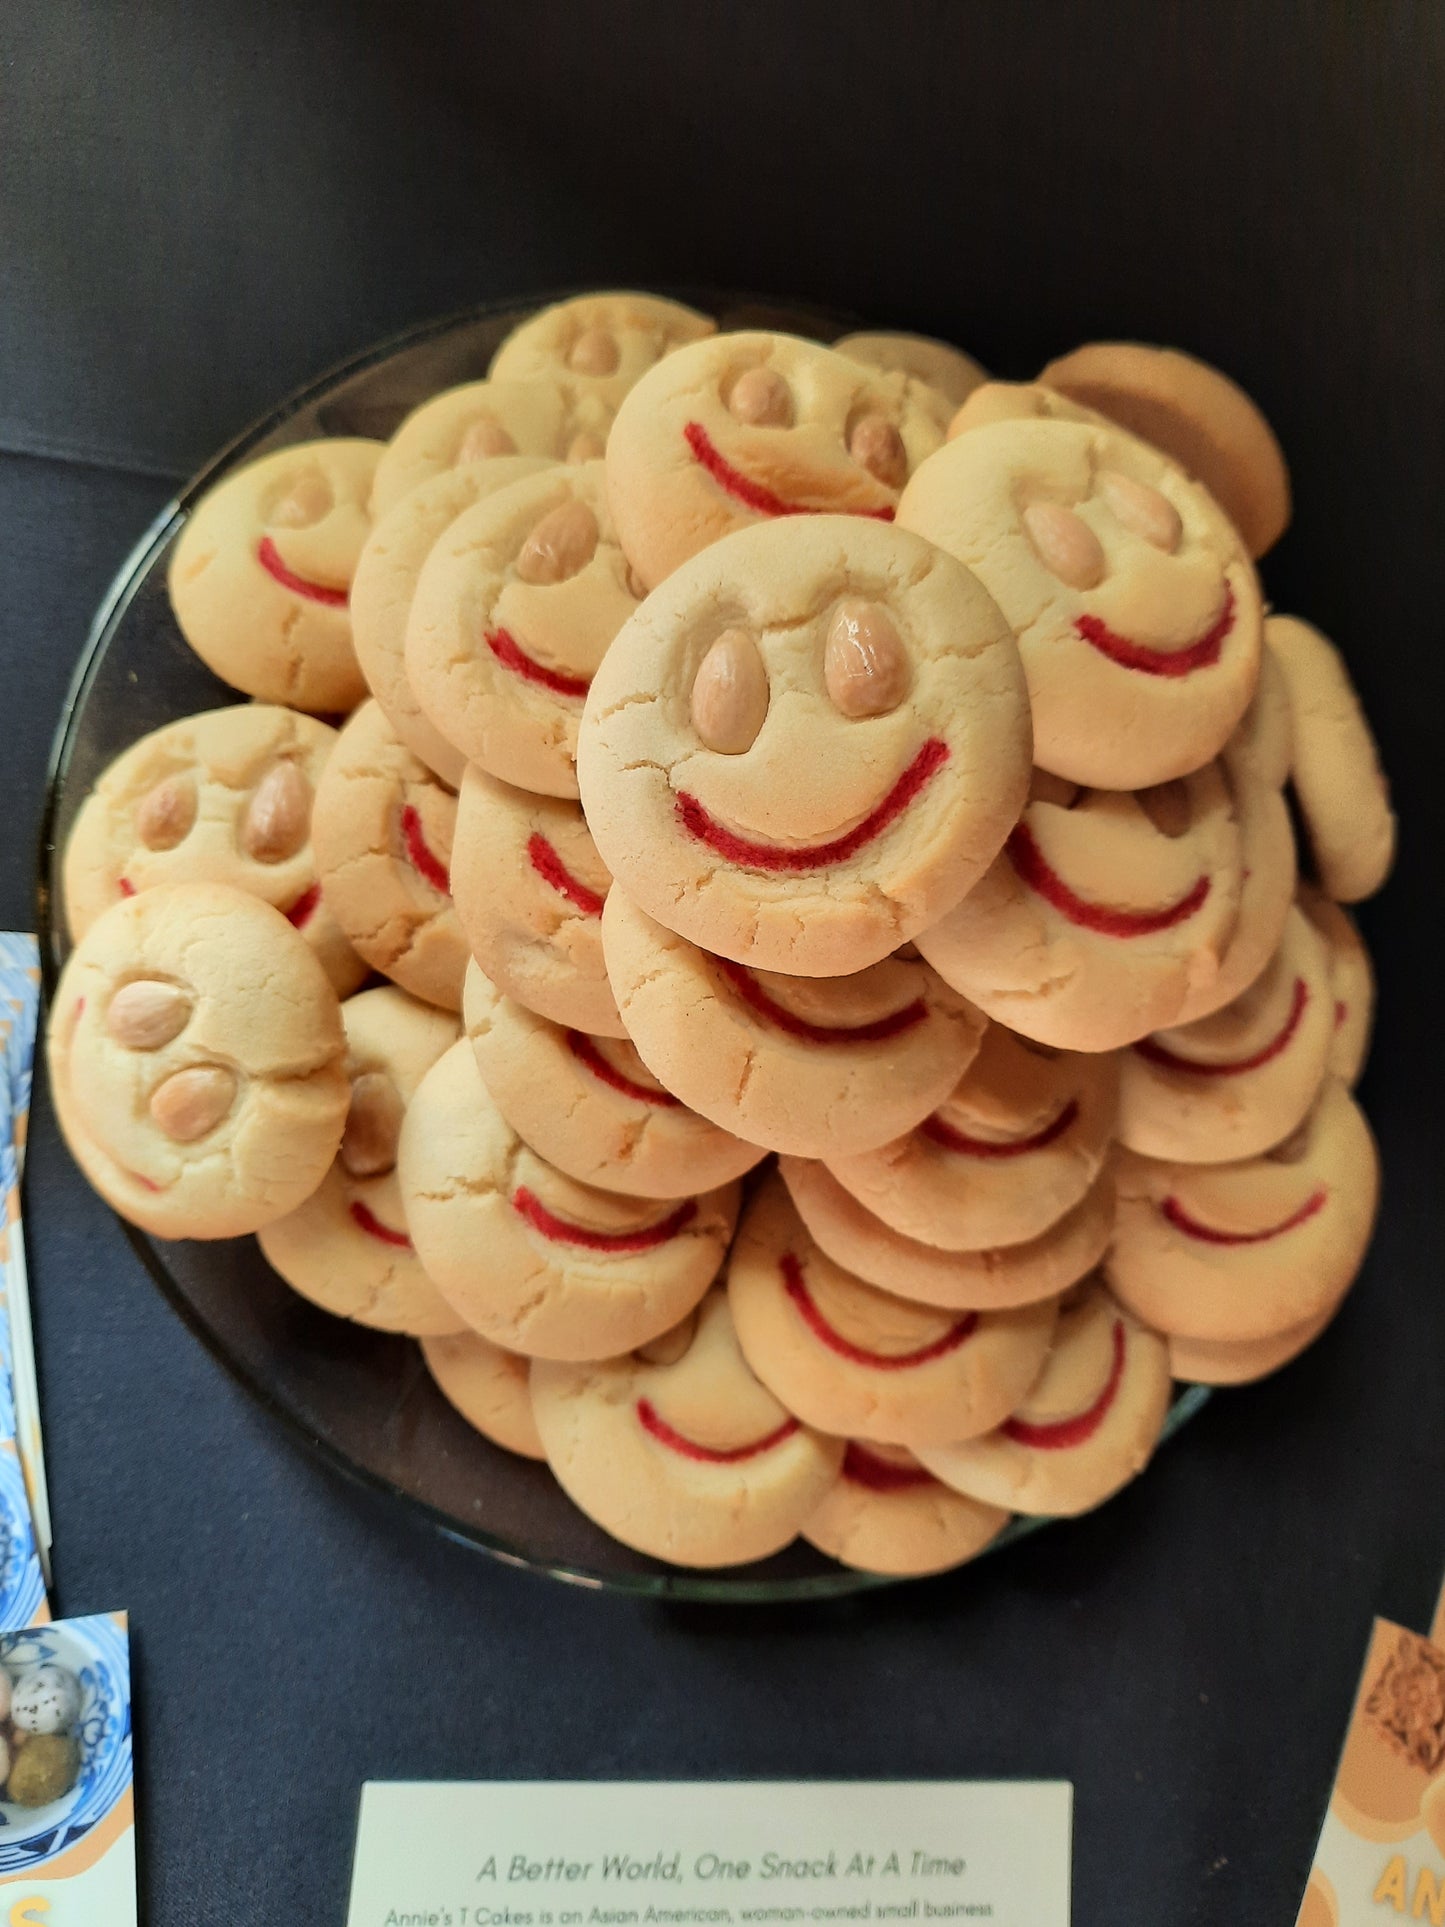 A pile of perfectly round smiley faced almond cookies on a black table. All almond cookies were made for the premier of Everything Everywhere All At Once.